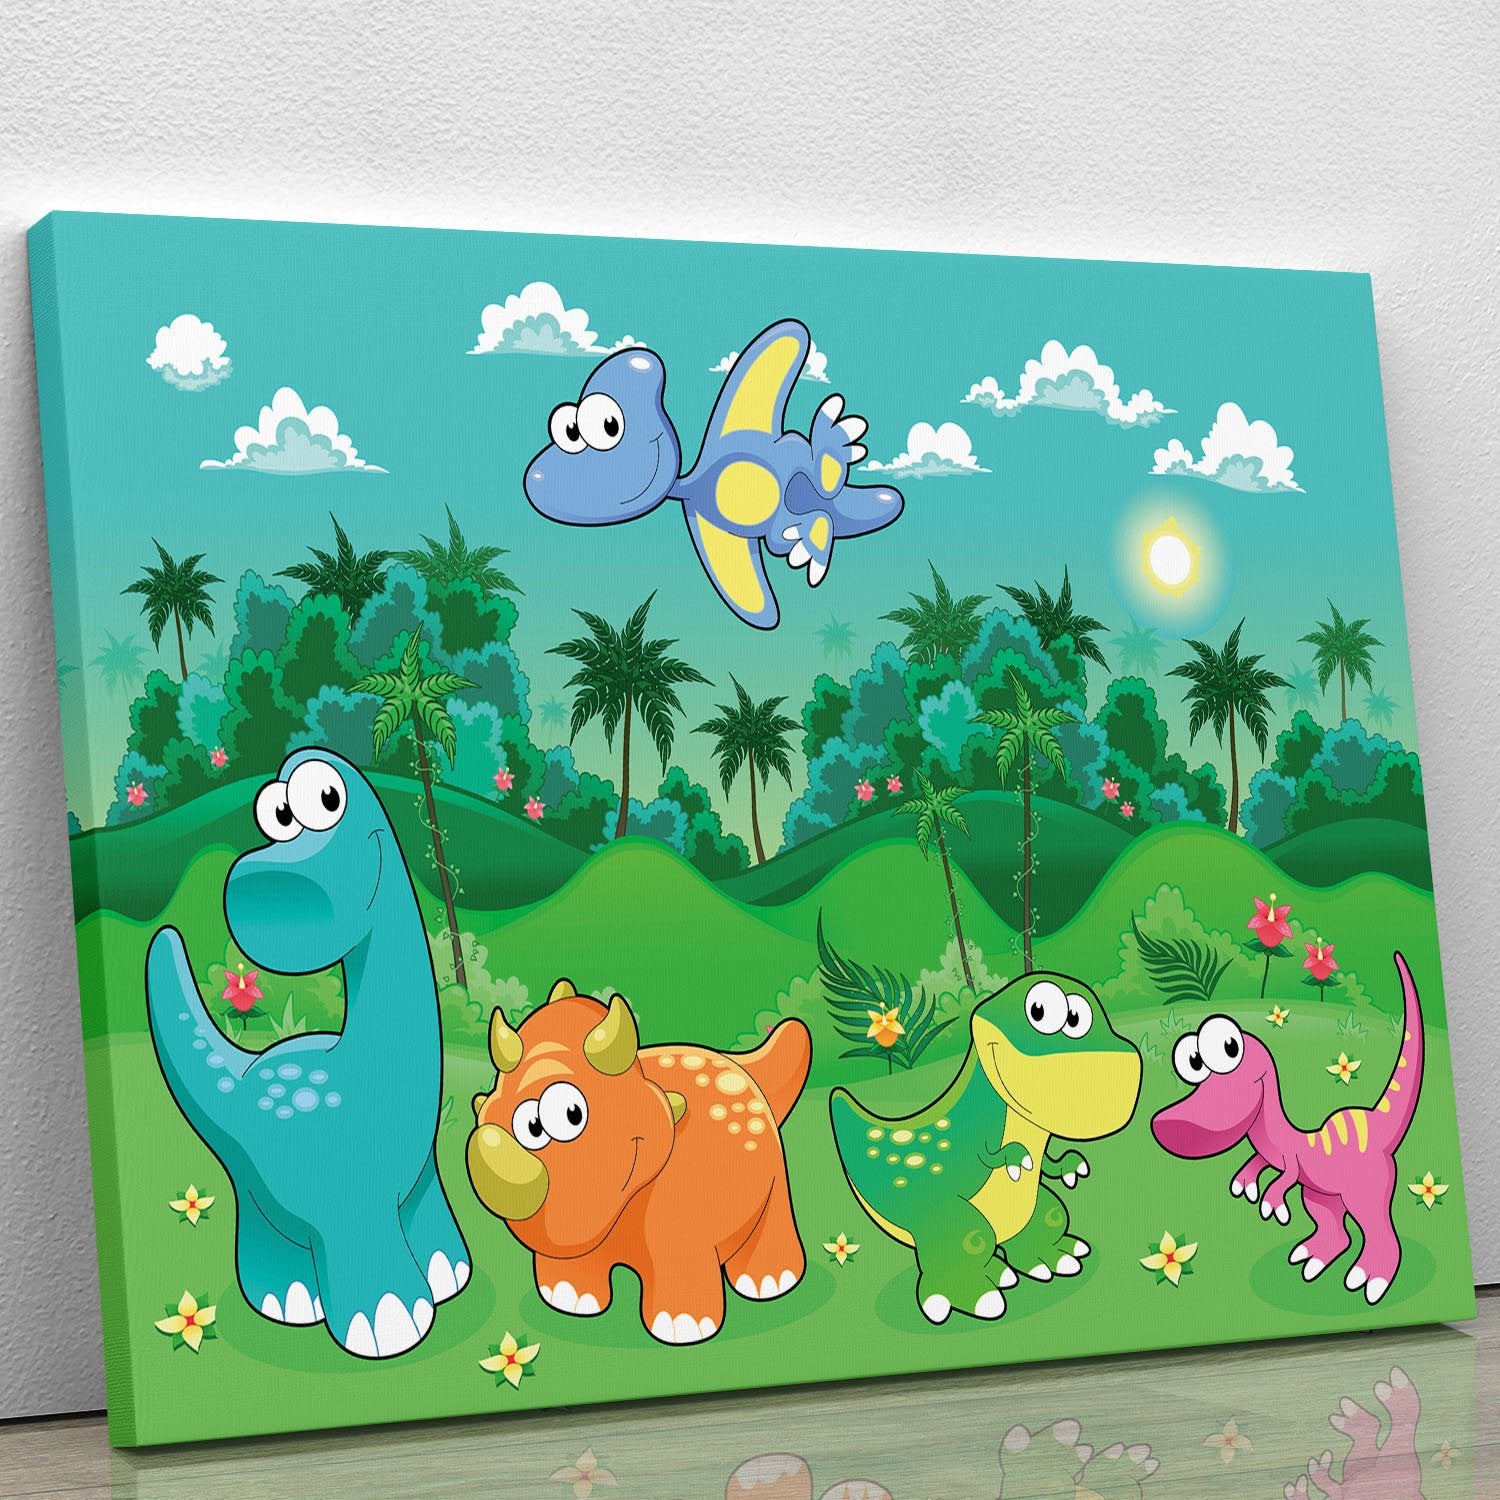 Funny dinosaurs in the forest Canvas Print or Poster